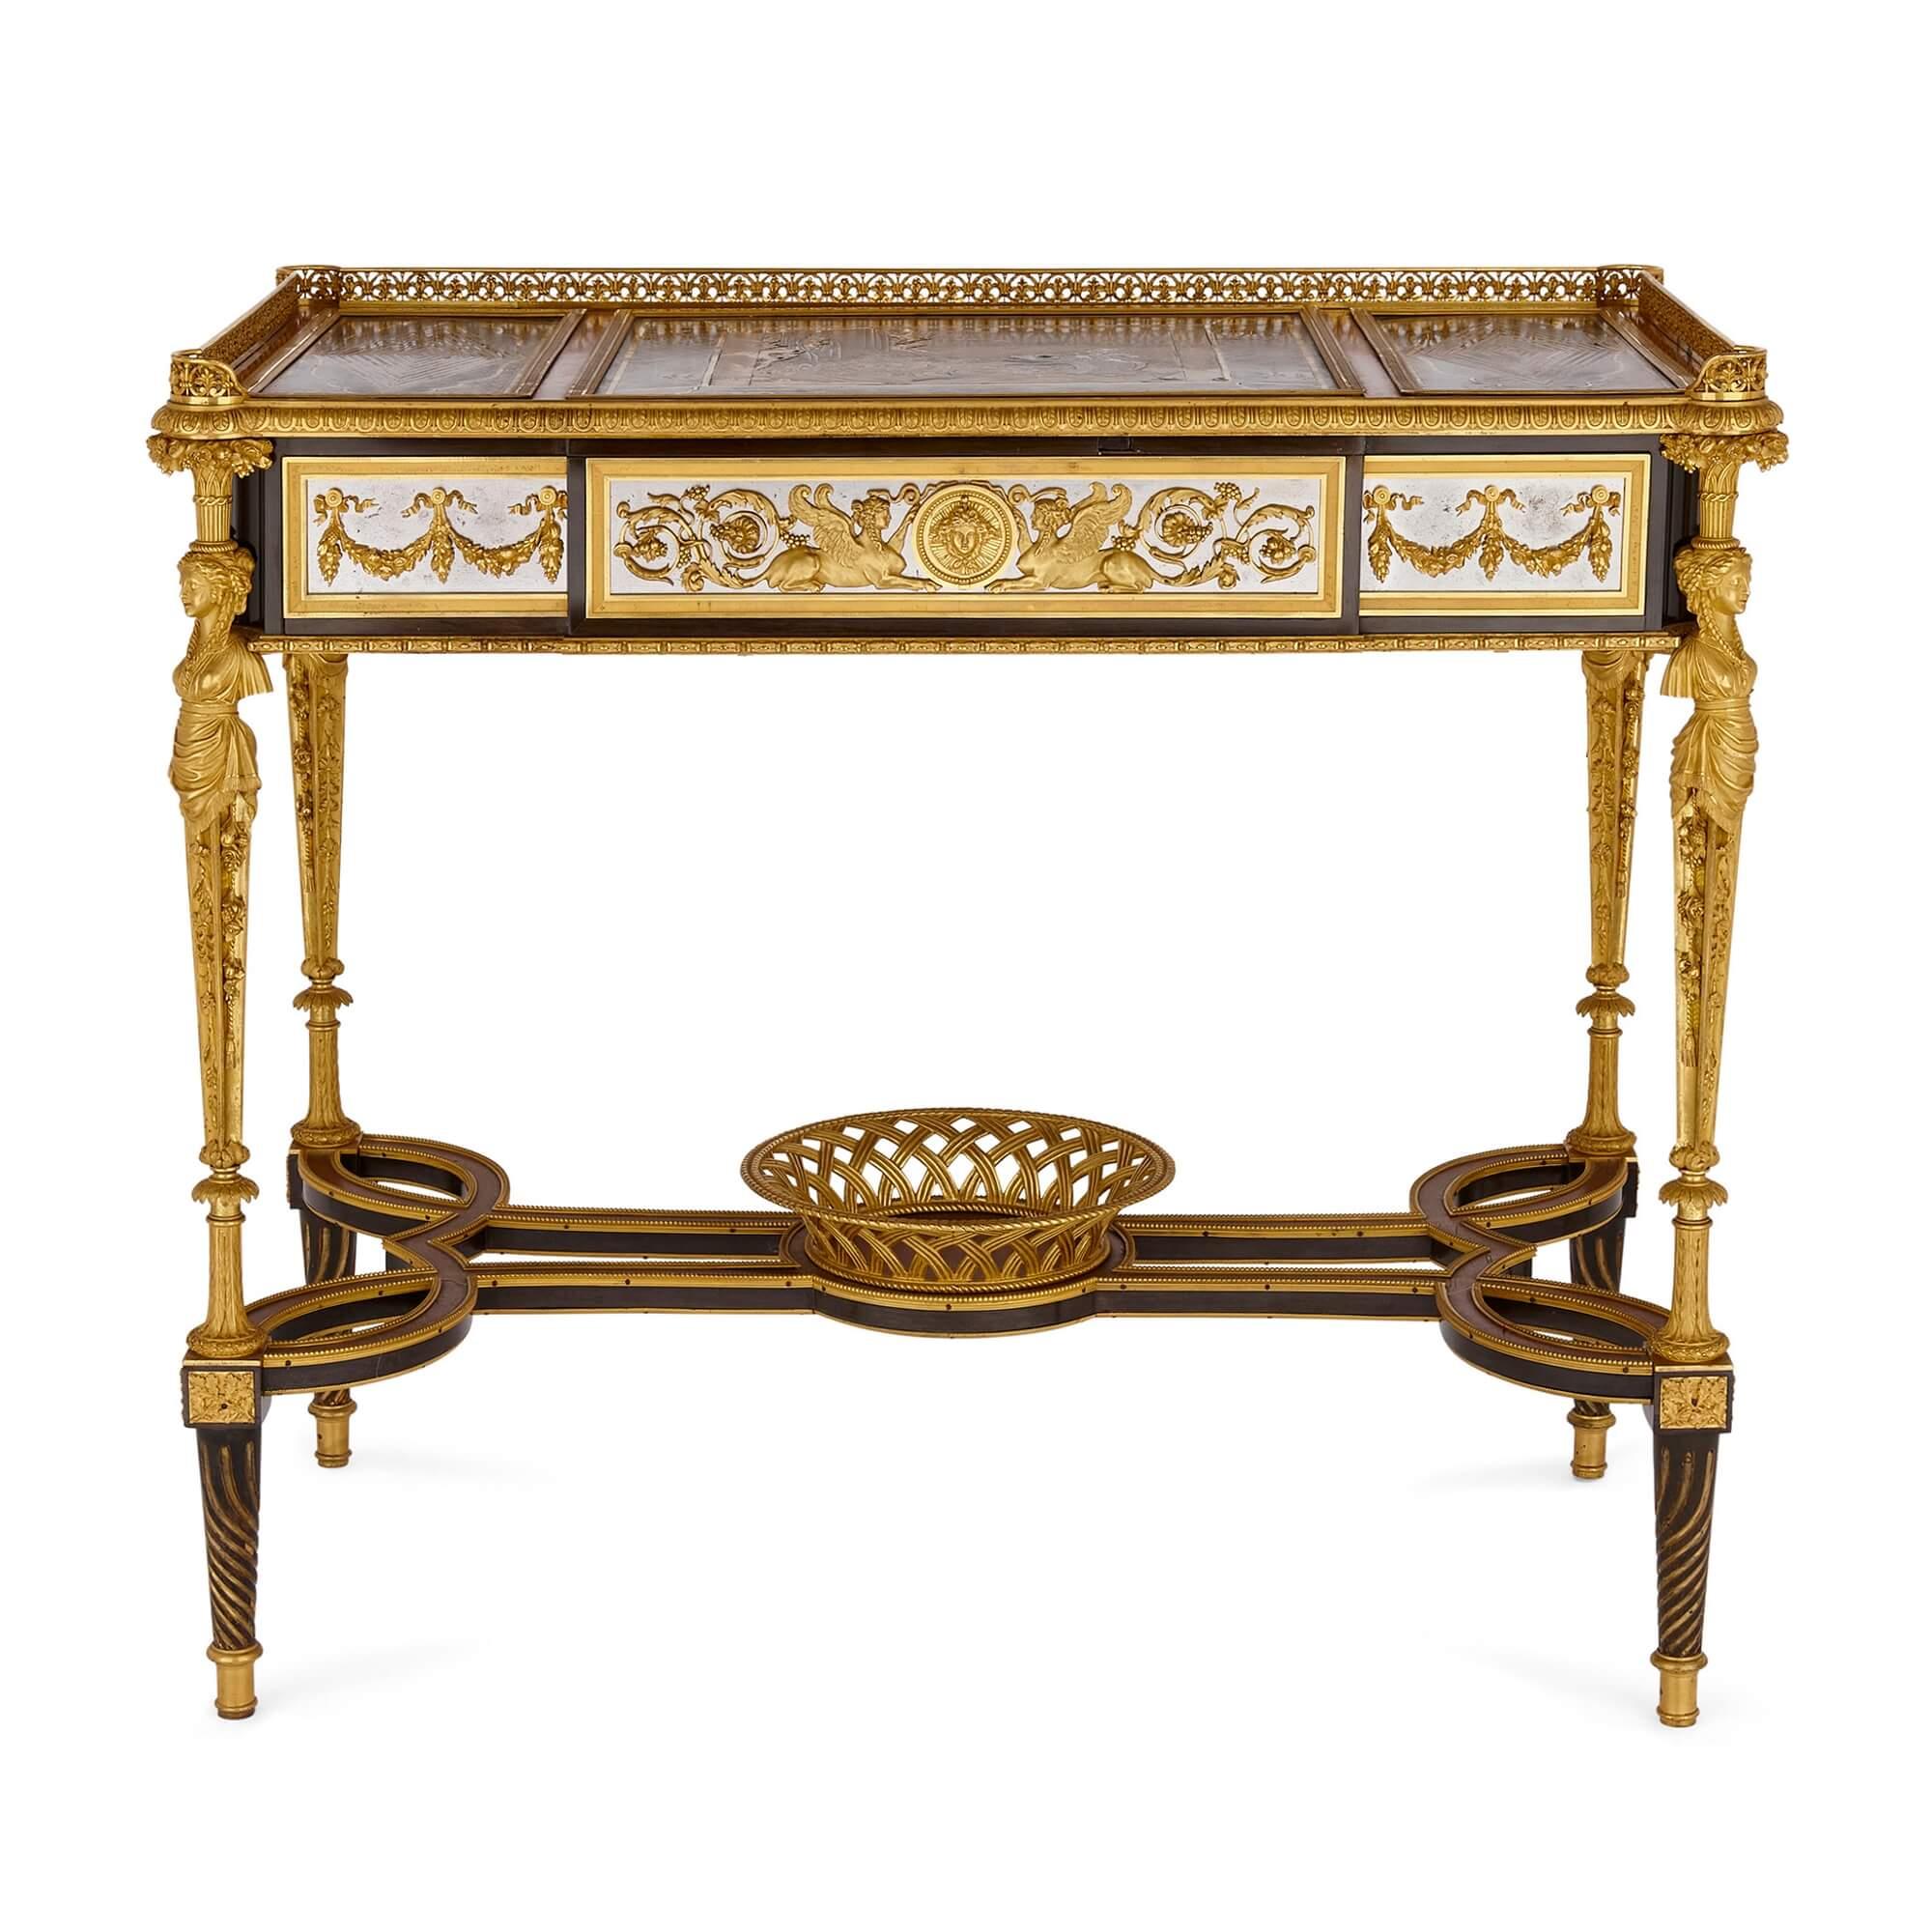 Antique writing table by Beurdeley after a model by Adam Weisweiler
French, c. 1880 
Height 74cm, width 83cm, depth 46cm

Crafted by the prestigious 19th century furniture makers Beurdeley (active 1818-1895), this extraordinary writing table